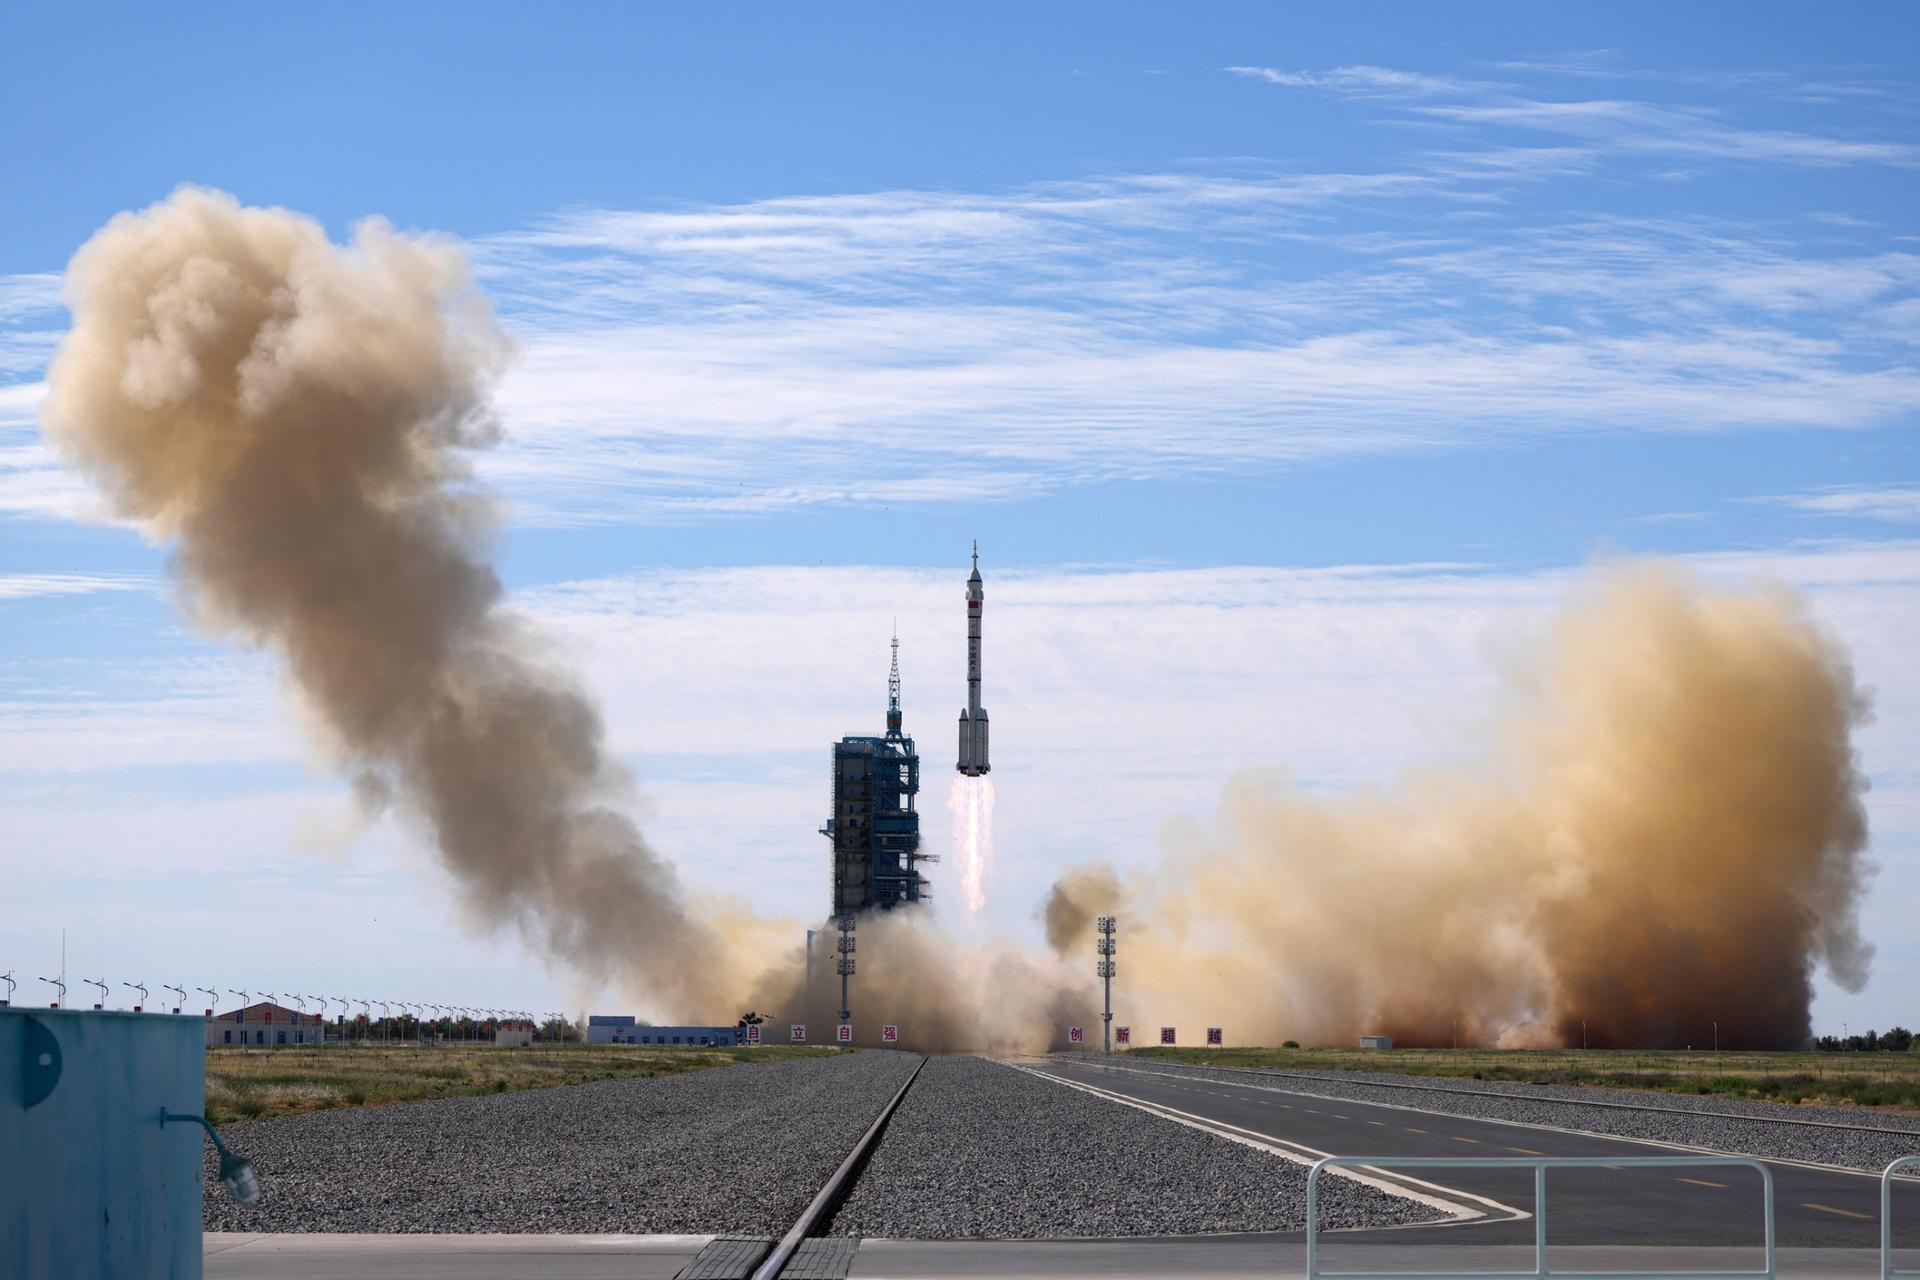 A spaceship is shown in the far distance being lifted into the sky via rockets with smoke billowing.